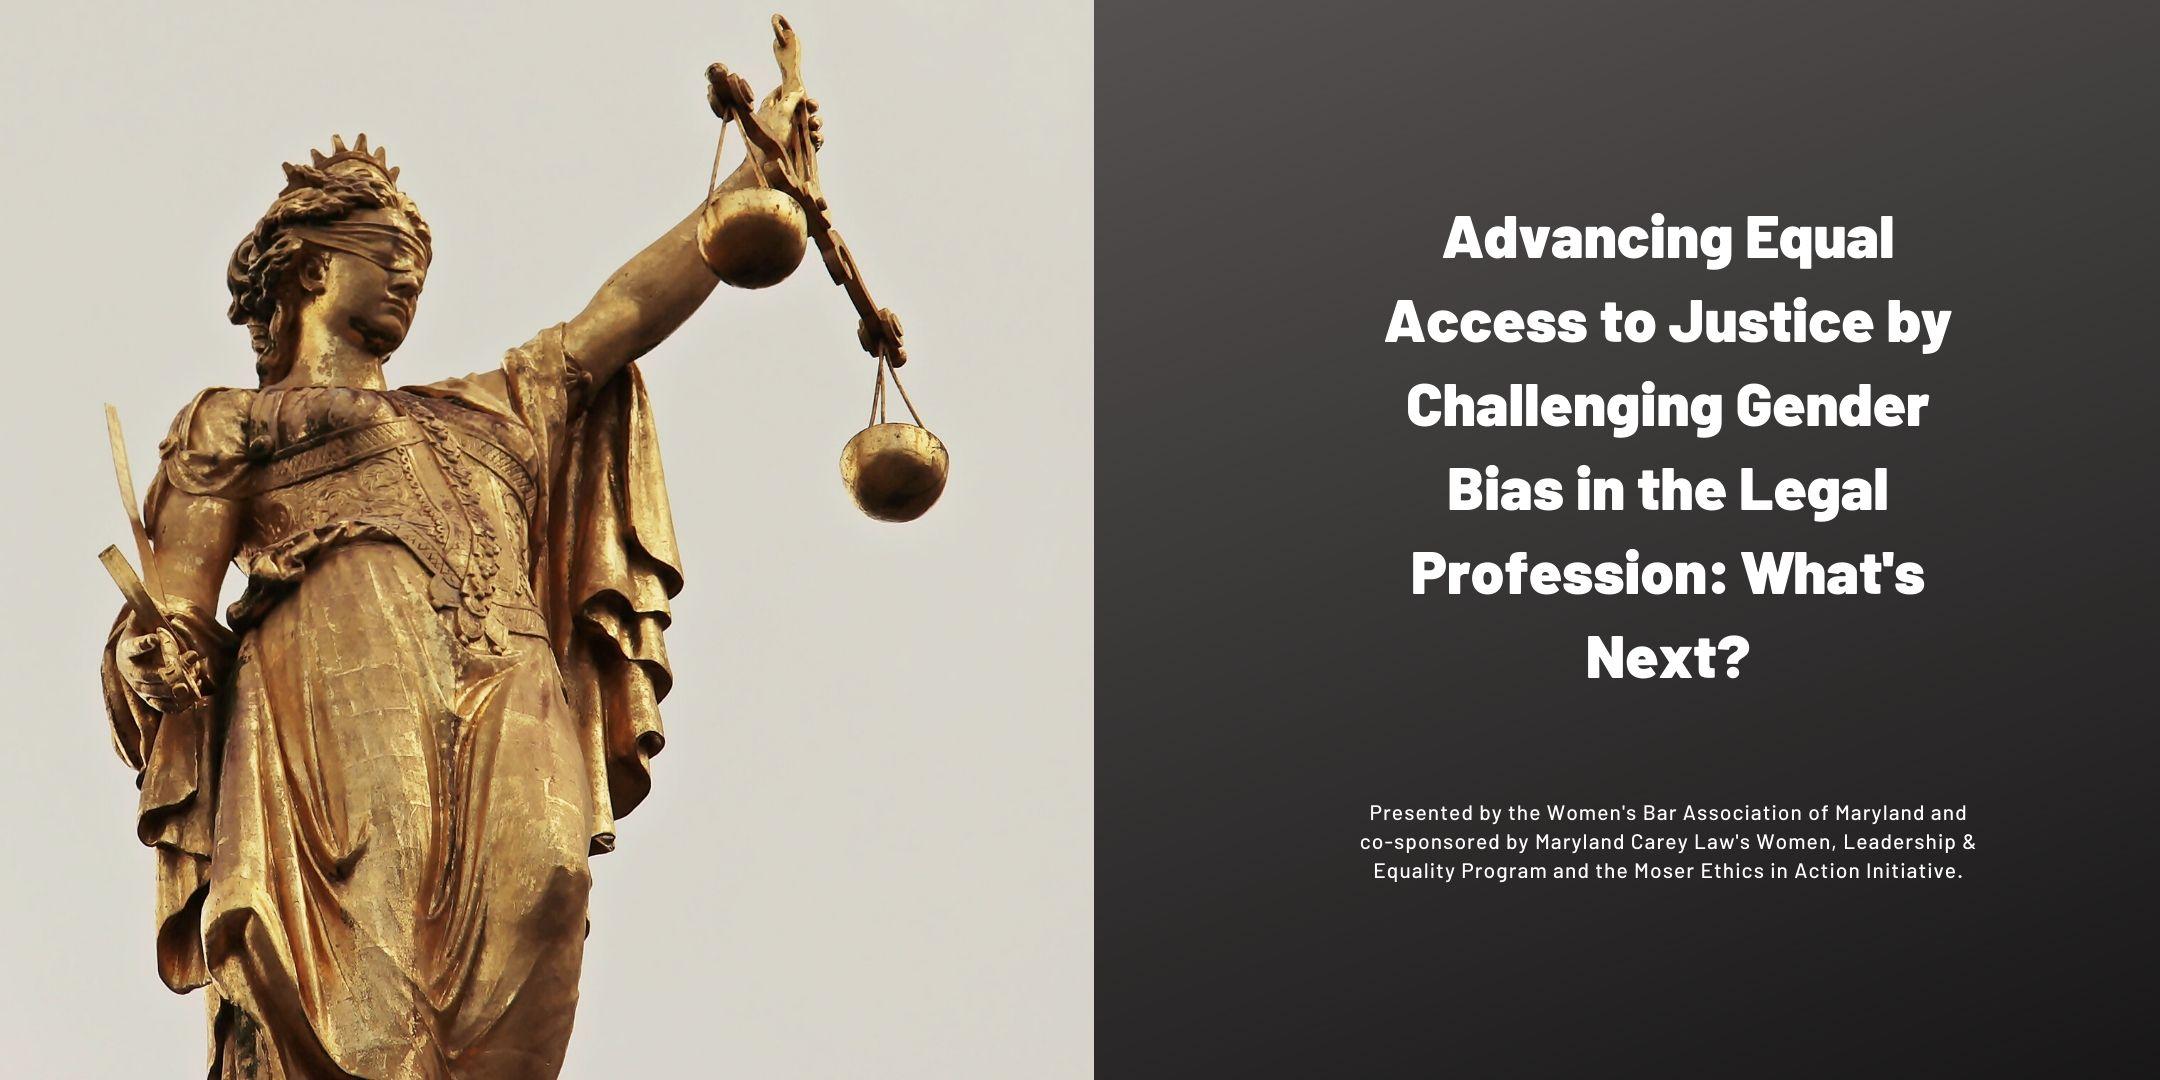 Advancing Equal Access to Justice by Challenging Gender Bias